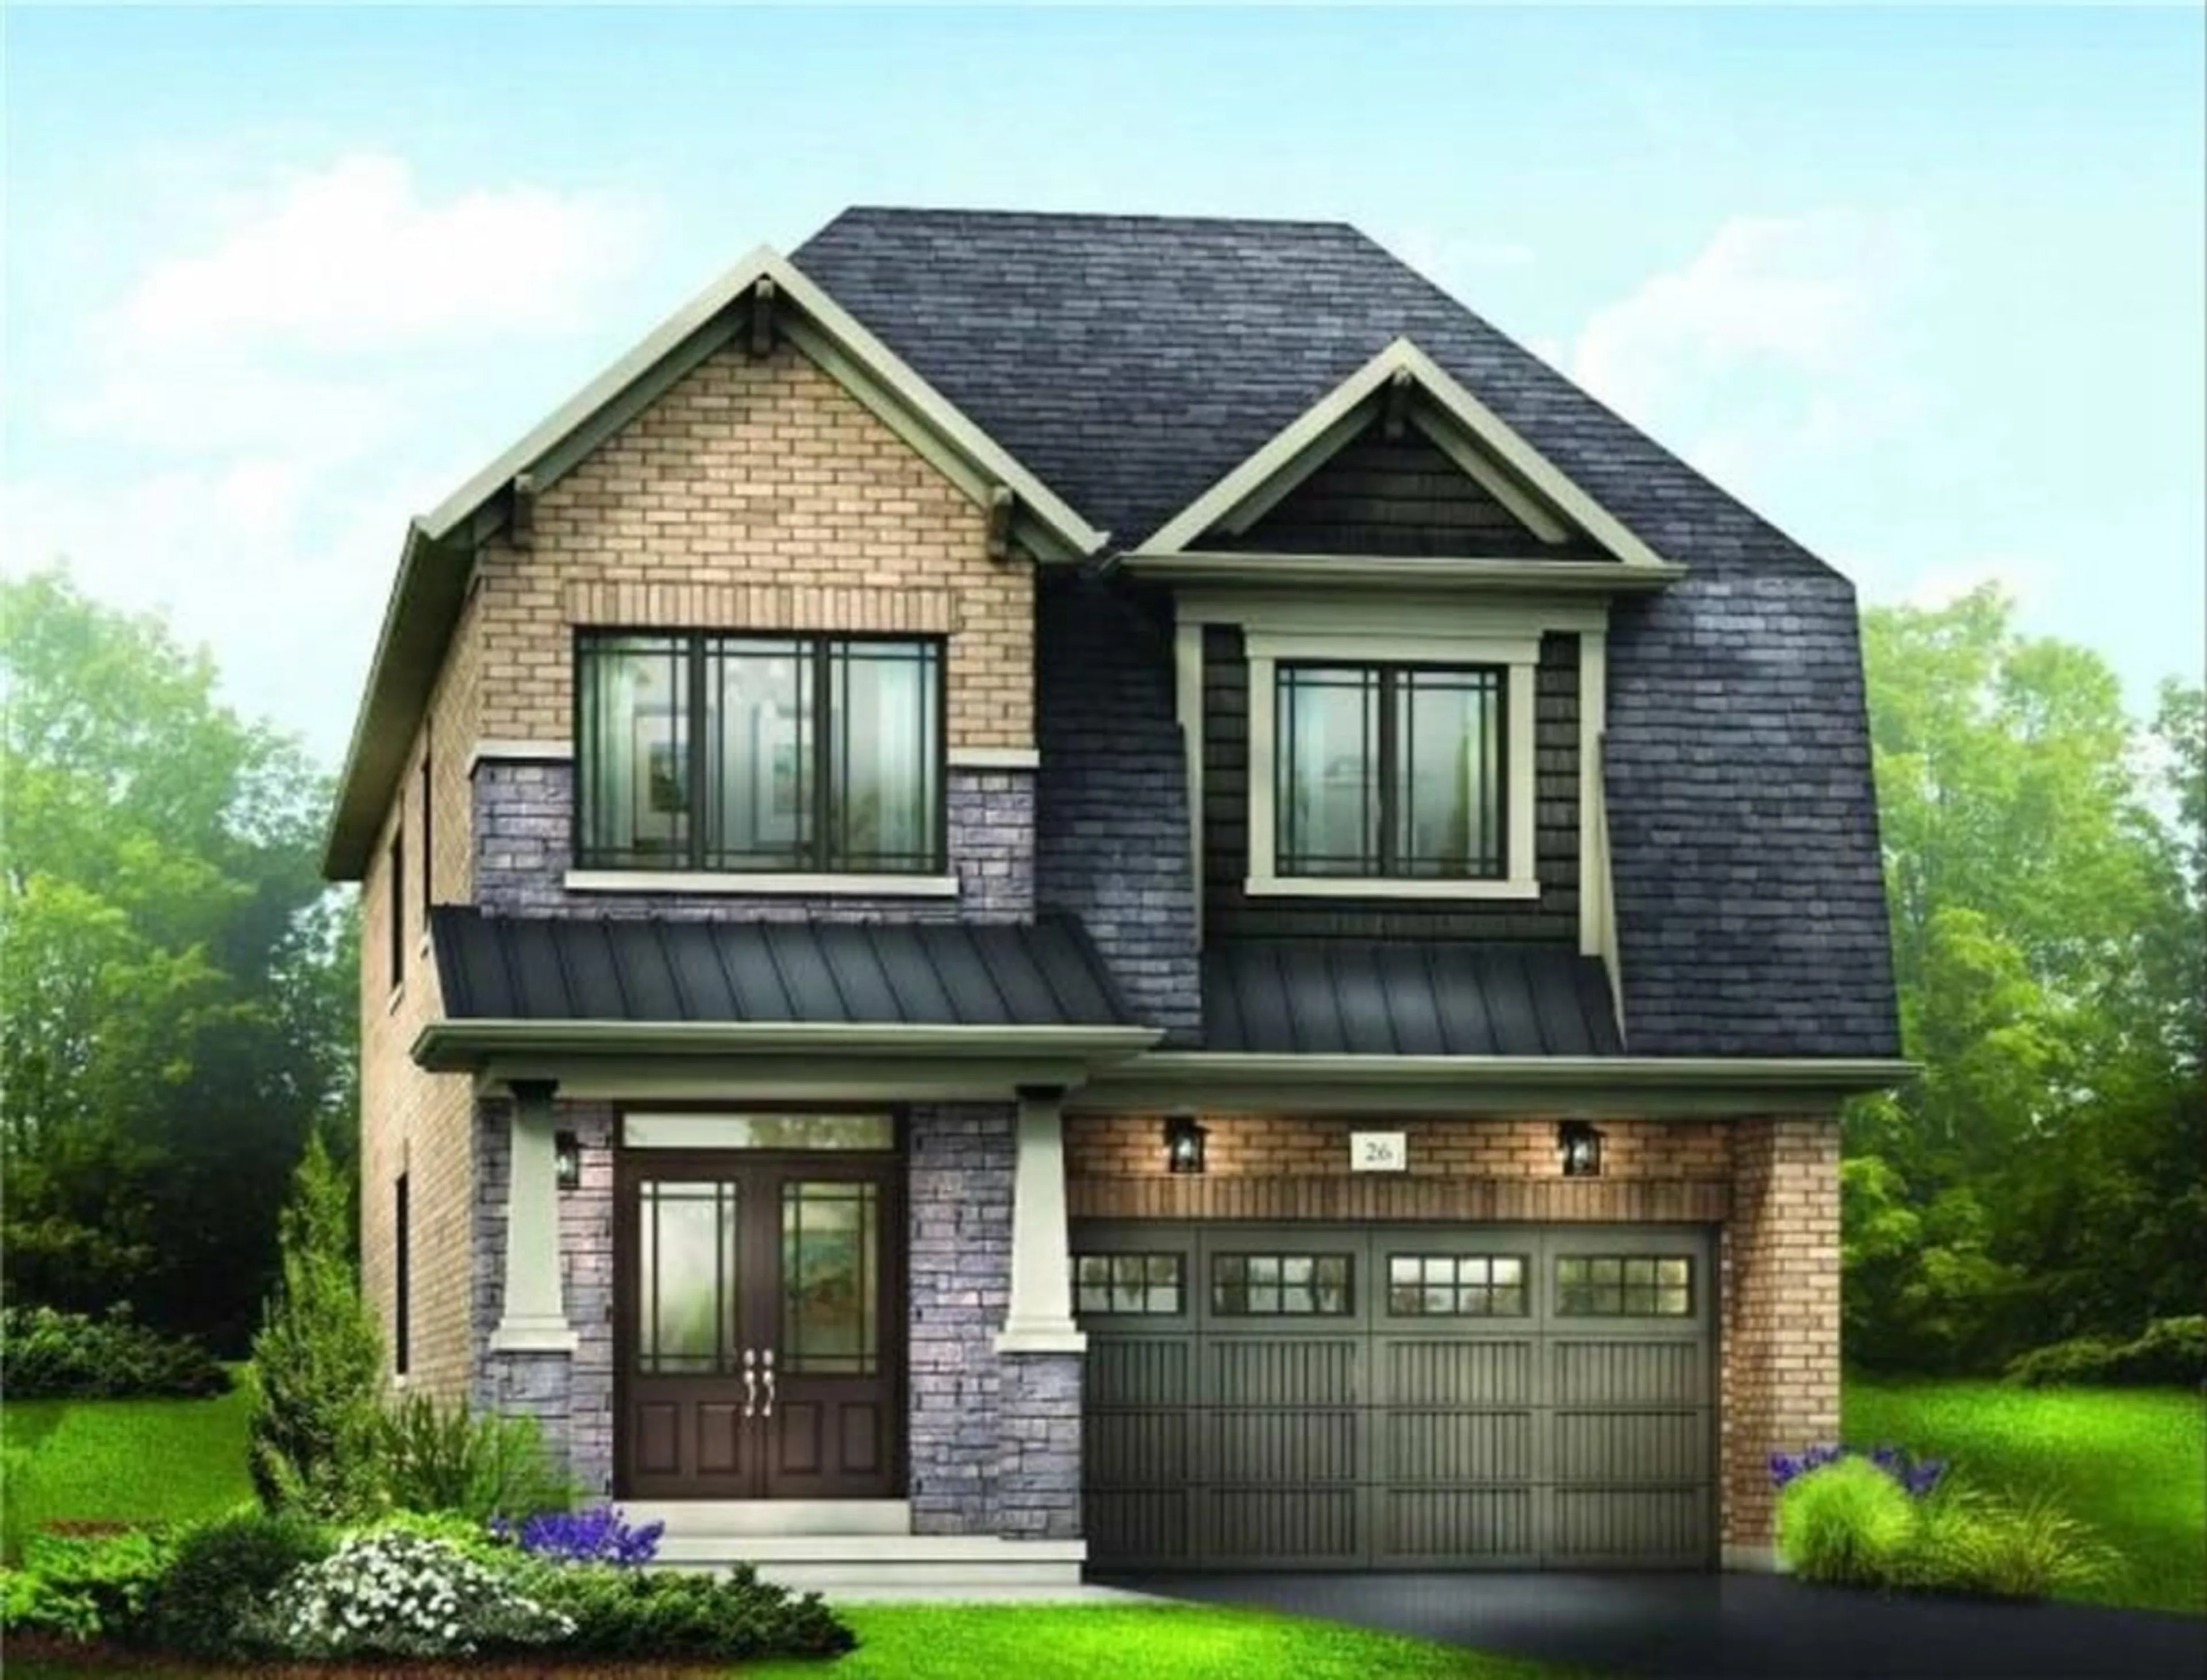 Home with brick exterior material for Lot 18 Stanley Ave, Caledonia Ontario N3W 1V6